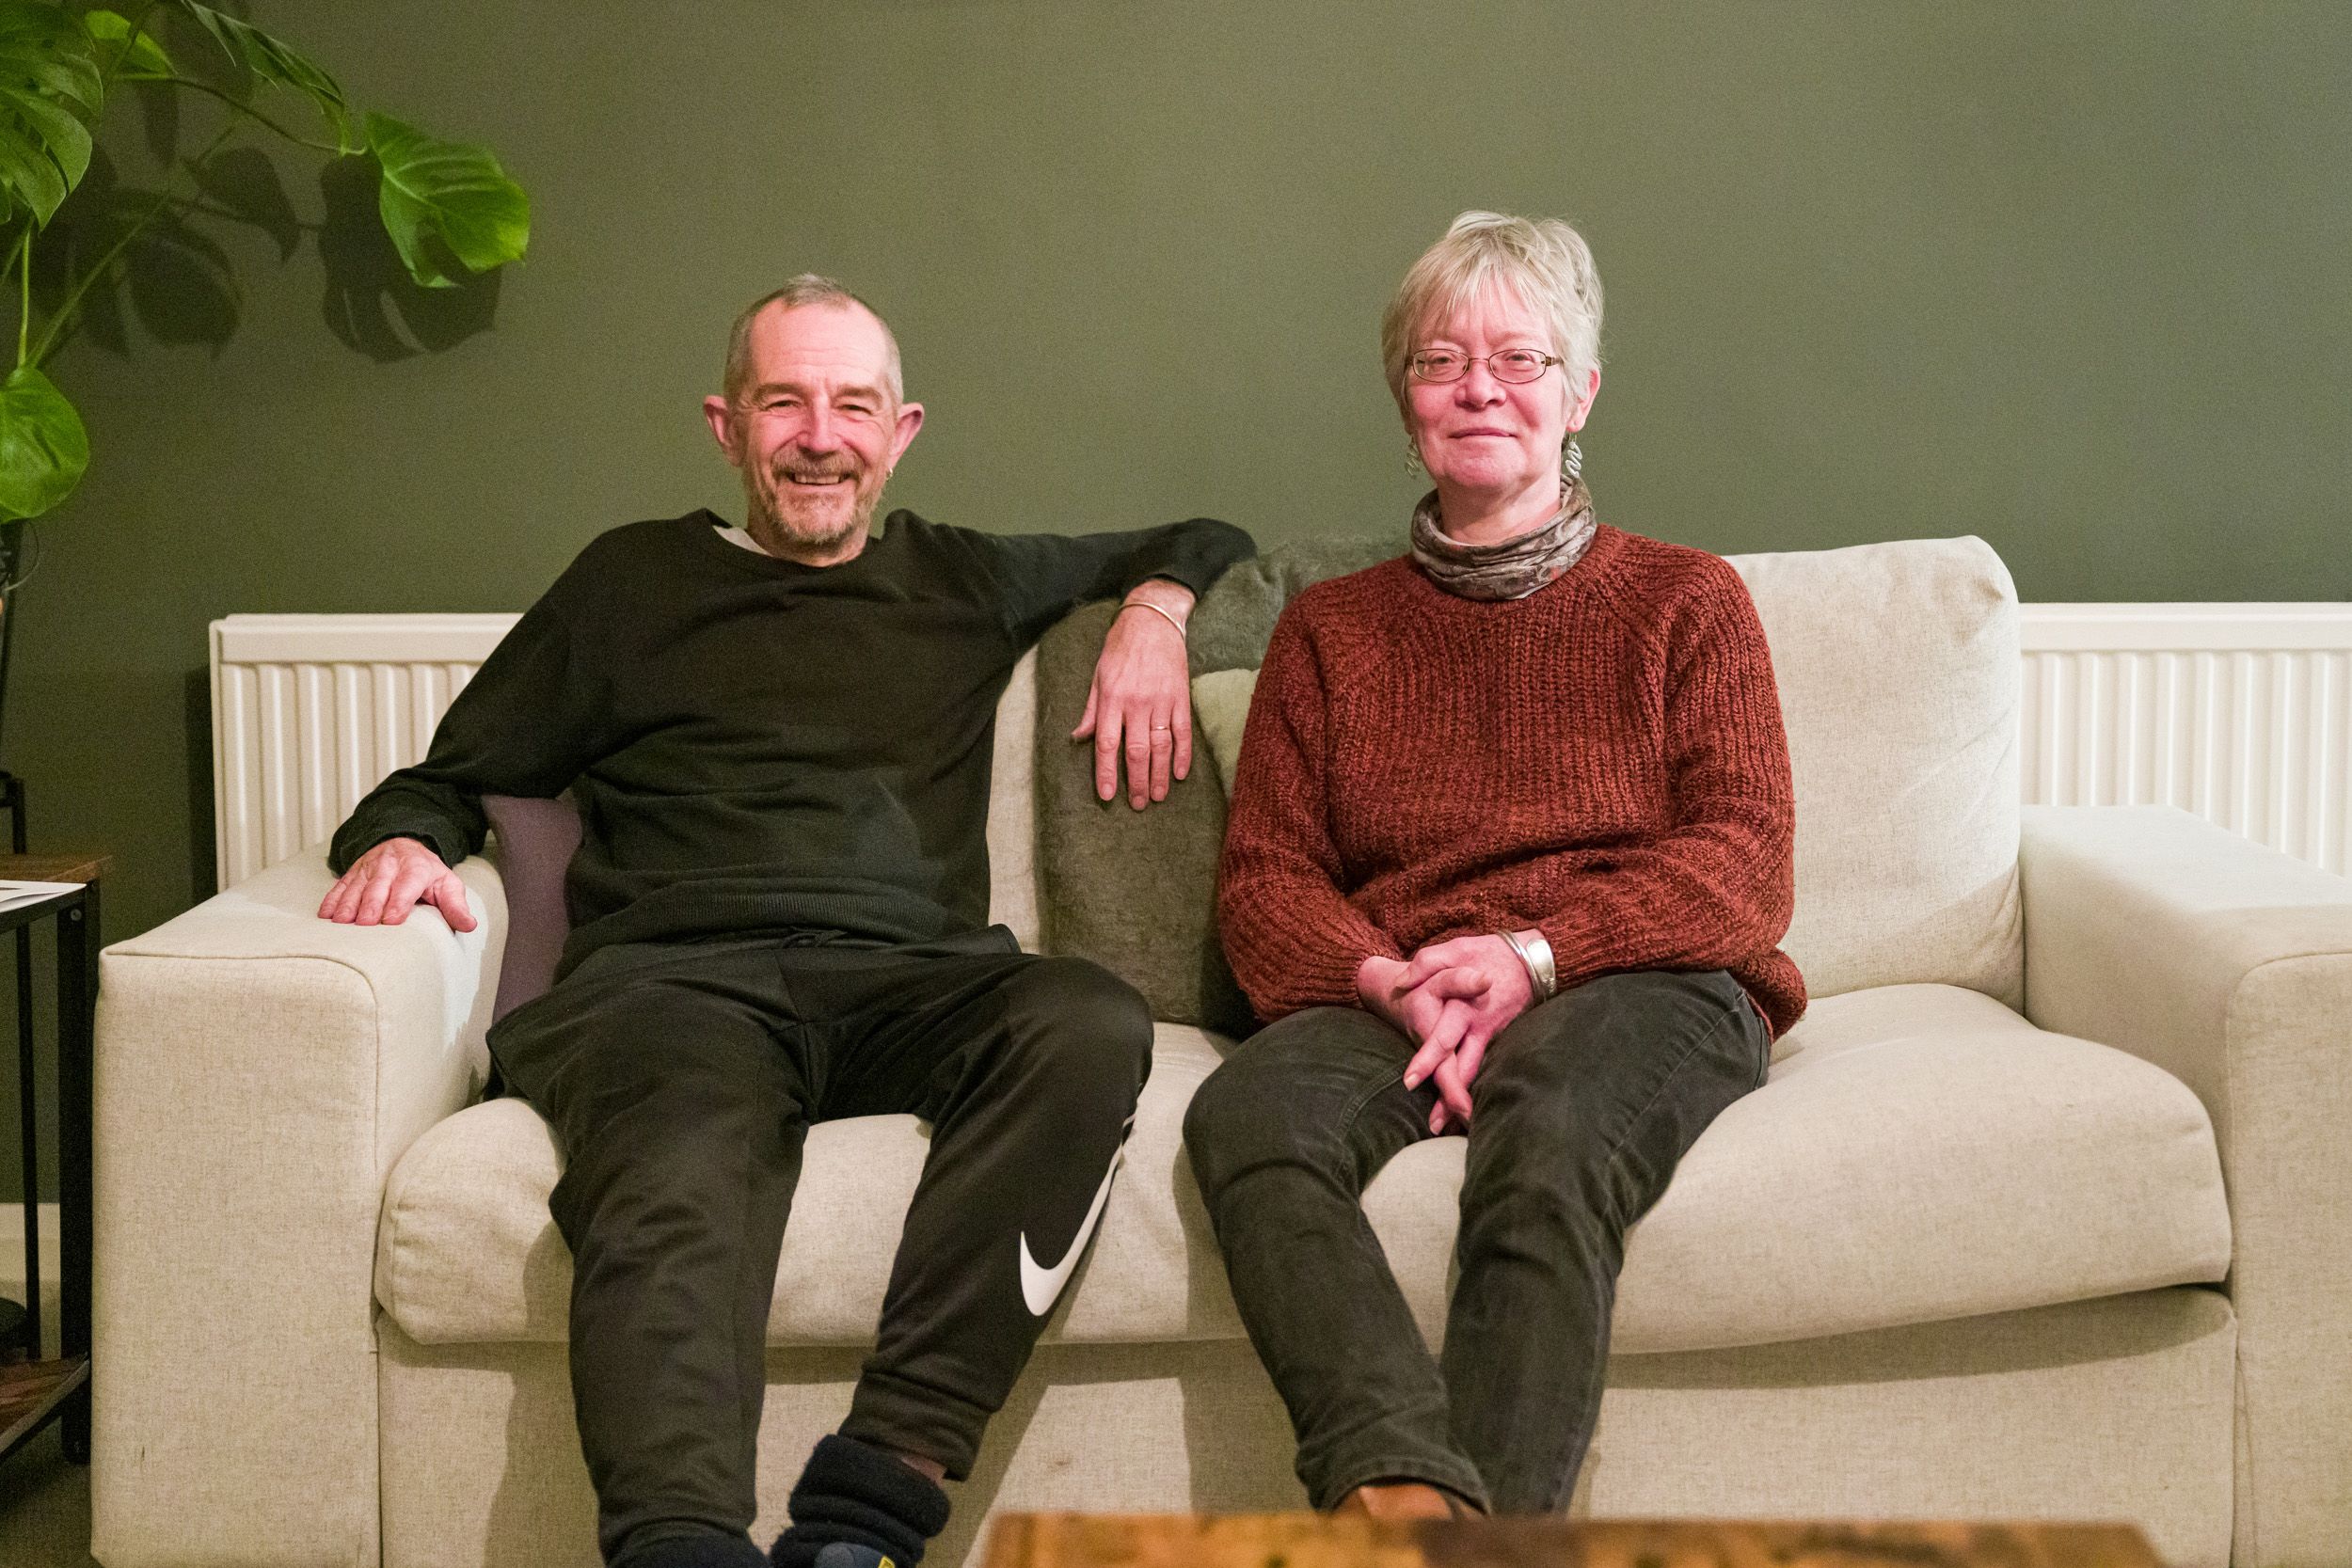 Compassionate Open Homes Nottingham volunteer hosts seated together, ready to provide a safe and welcoming space for young people facing homelessness.